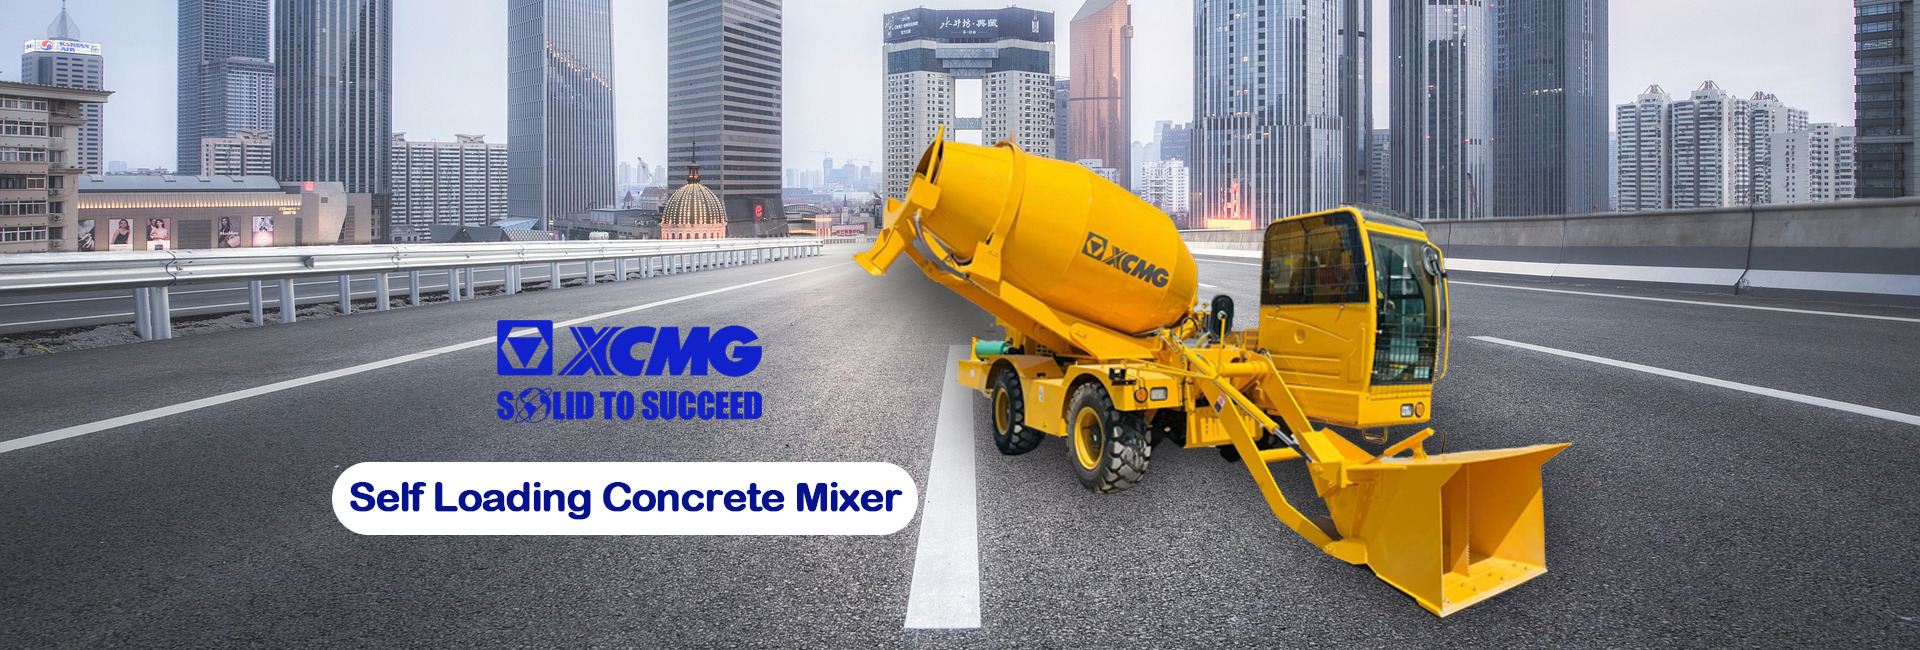 XCMG E-commerce Inc. - Construction machinery undefined: picture 1